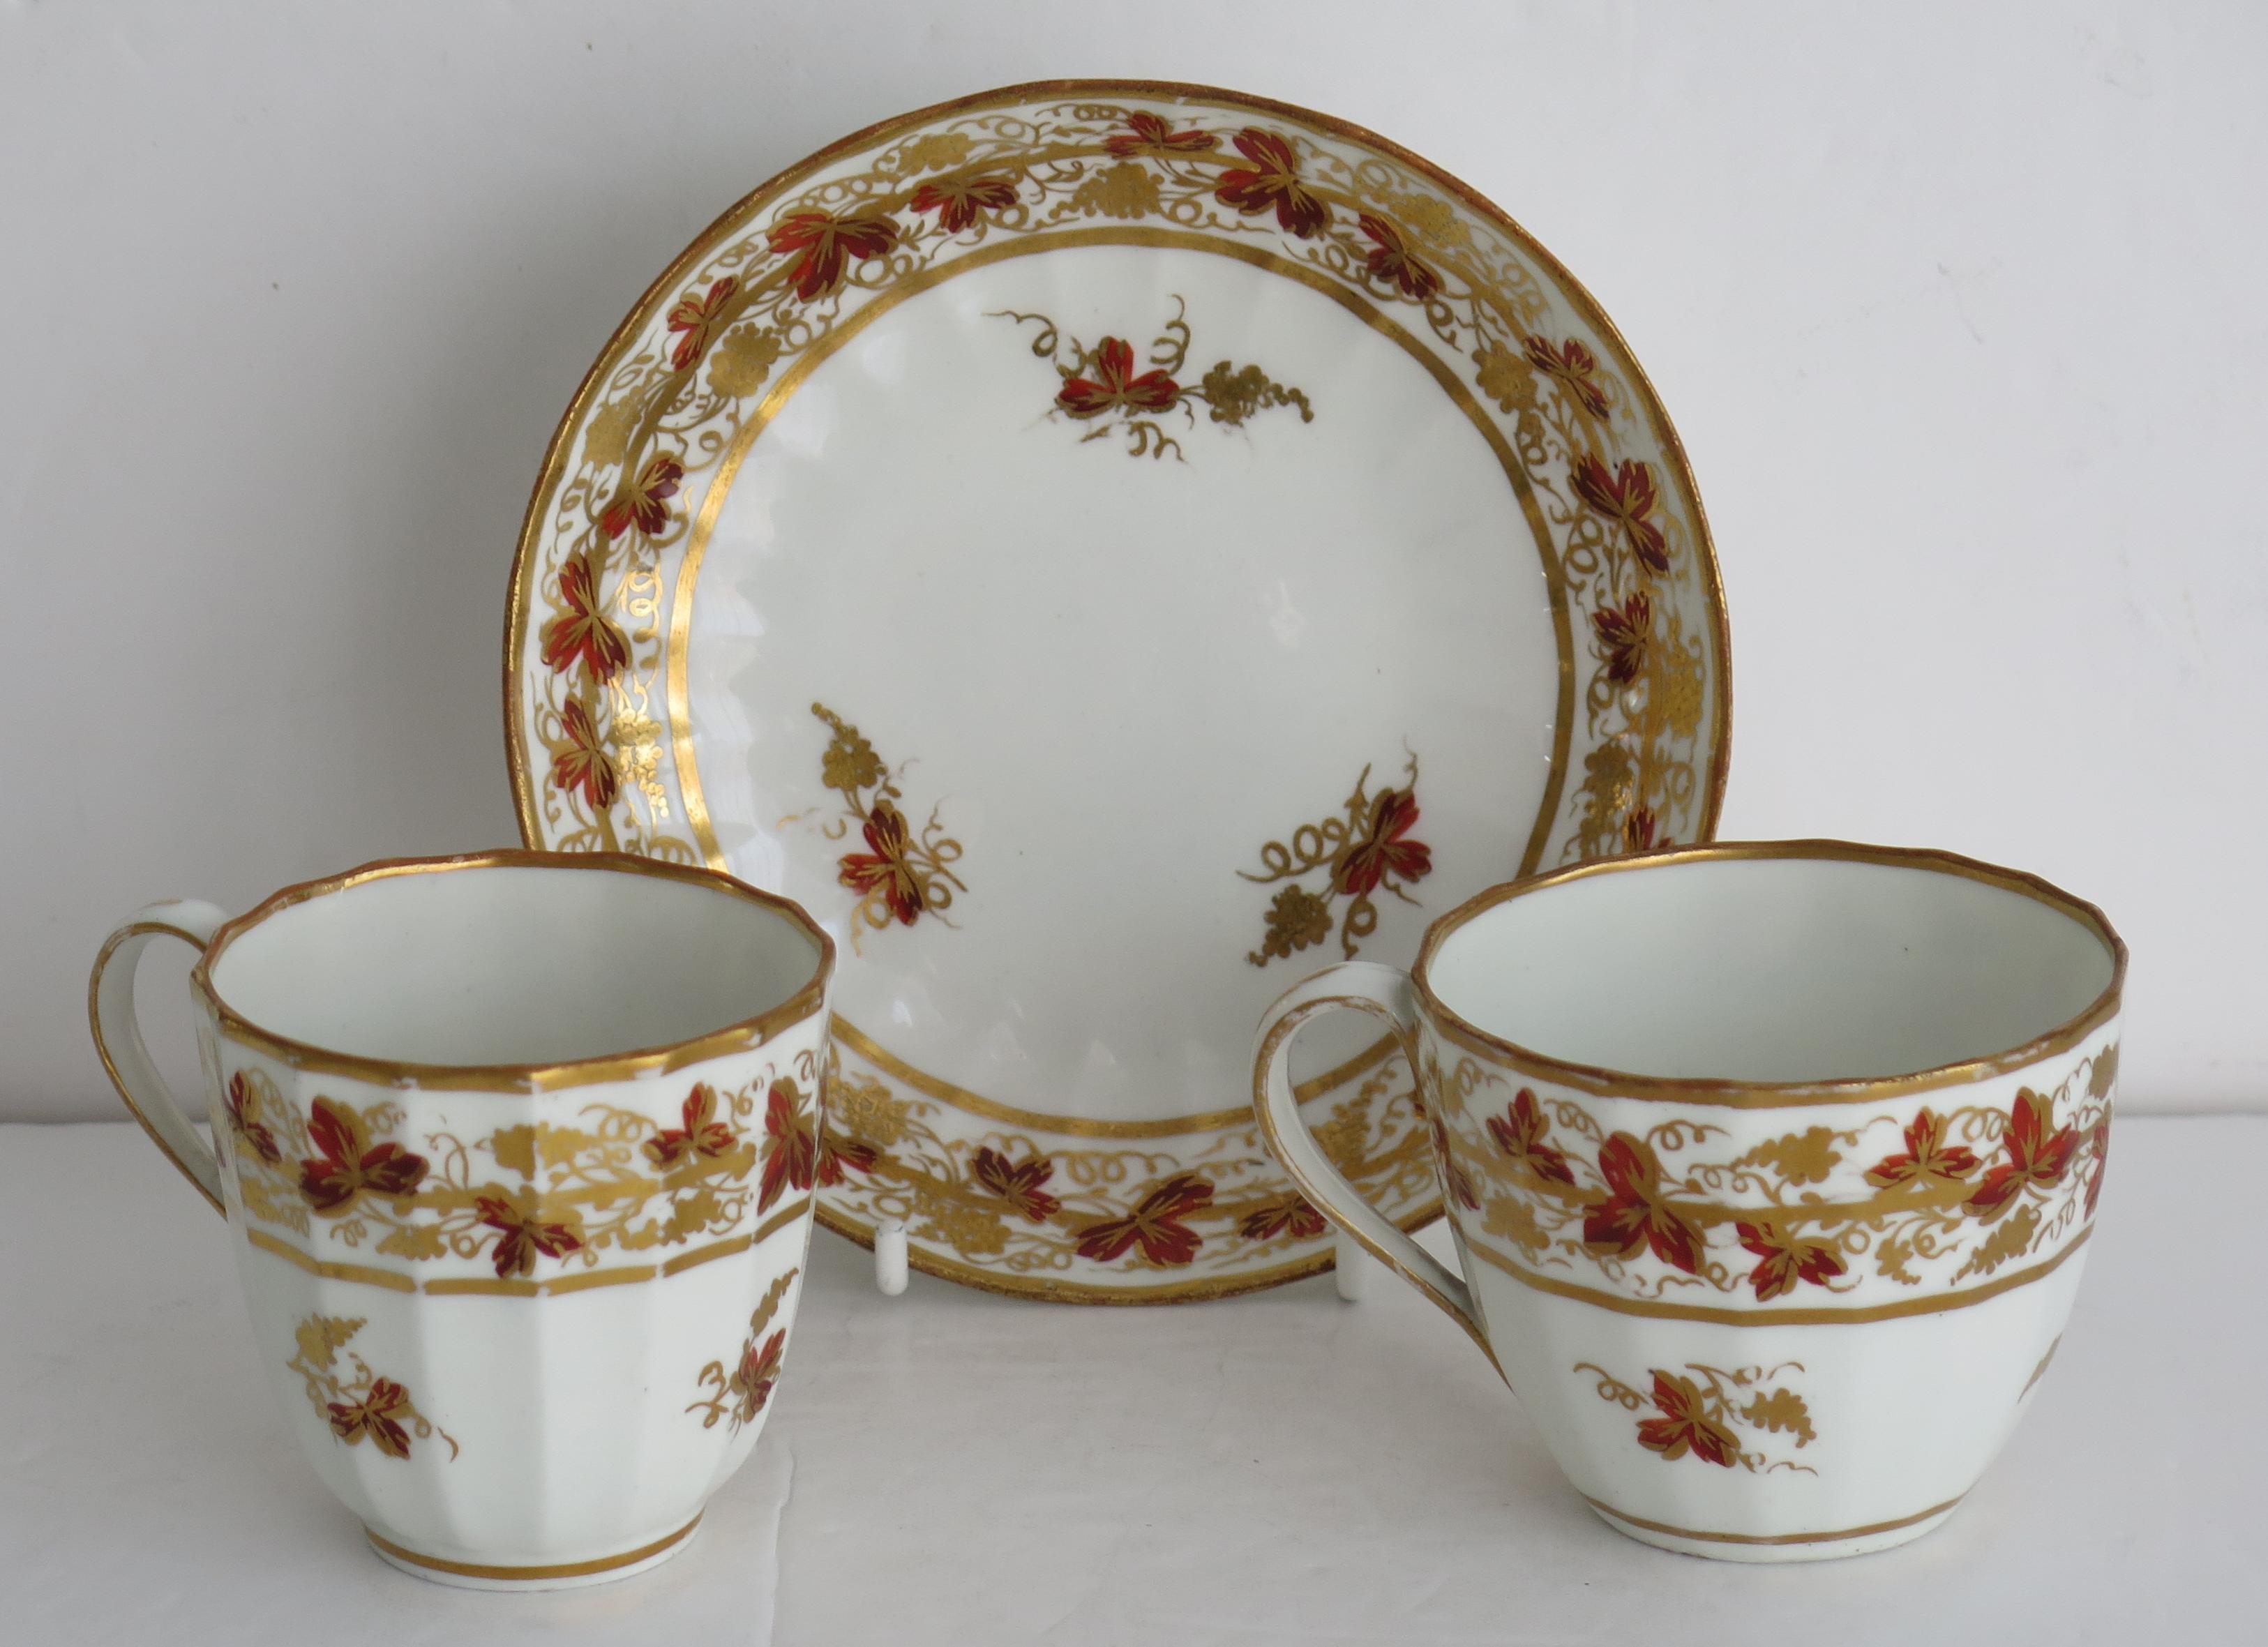 This is a good porcelain TRIO of a Tea Cup, Coffee Cup and saucer by the Derby factory, made during the George 111rd period, circa 1795.

The pieces are well potted in the Hamilton flute shape with 16 vertical facets. 

The hand decoration is